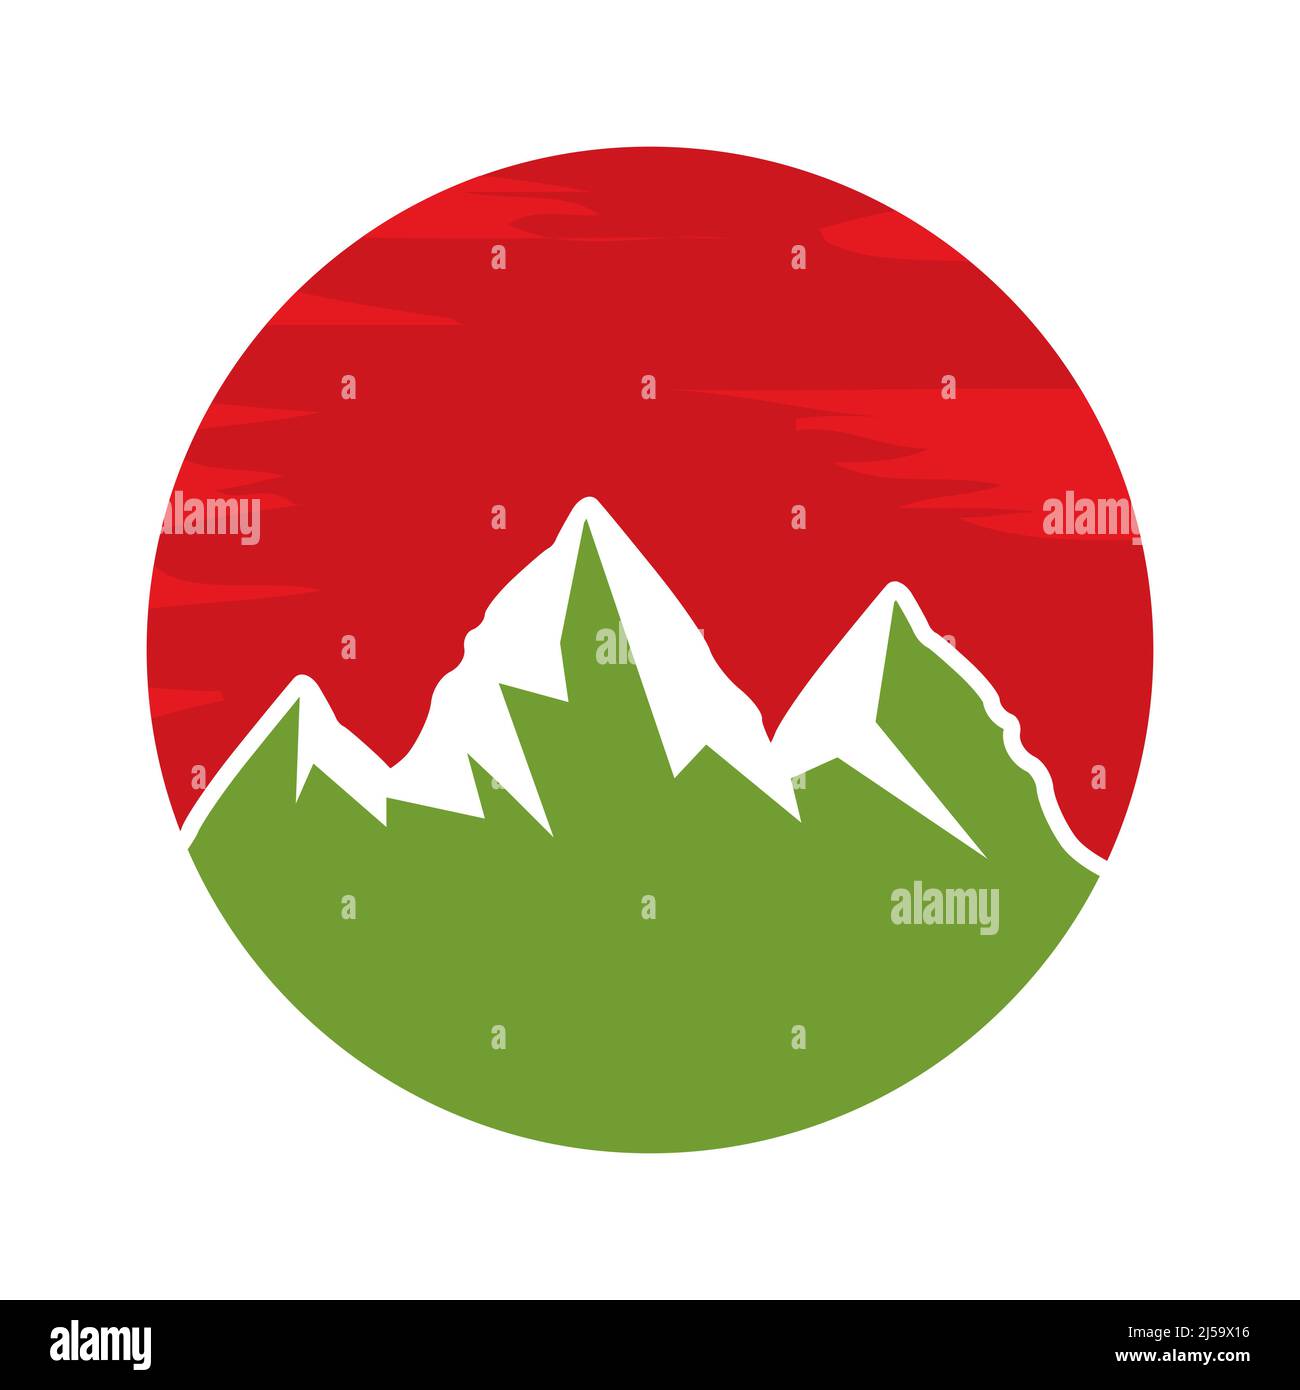 Mountain Logo with circle sign. Flat design. Vector Illustration on white background. Stock Vector